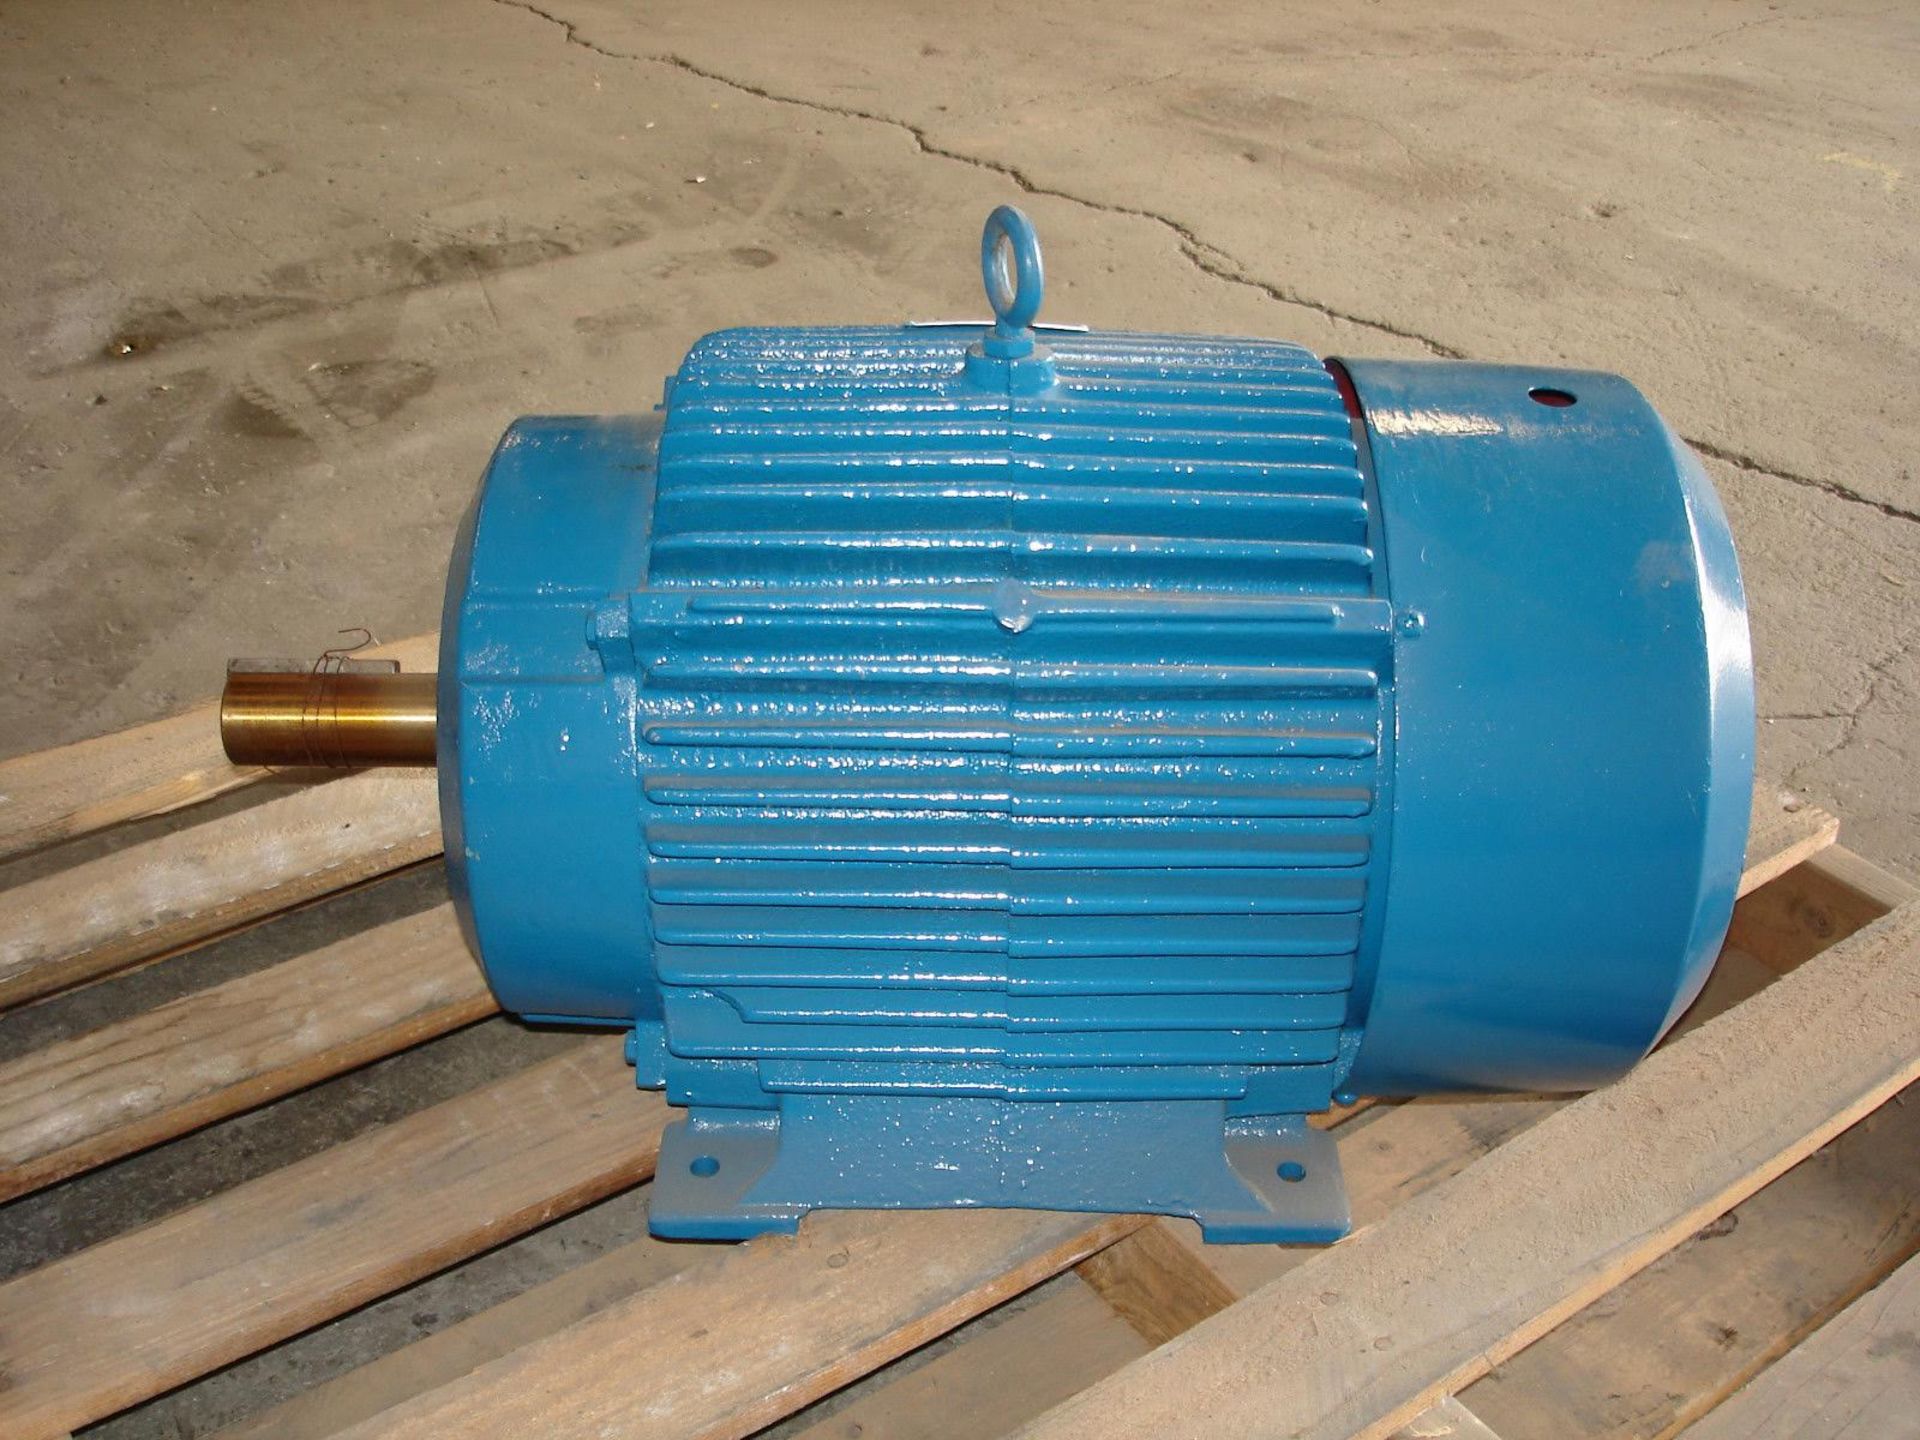 (1) *REMANUFACTURED* Reliance 286T Duty Master AC Motor 30HP 1760RPM *REMANUFACTURED* - Image 4 of 7